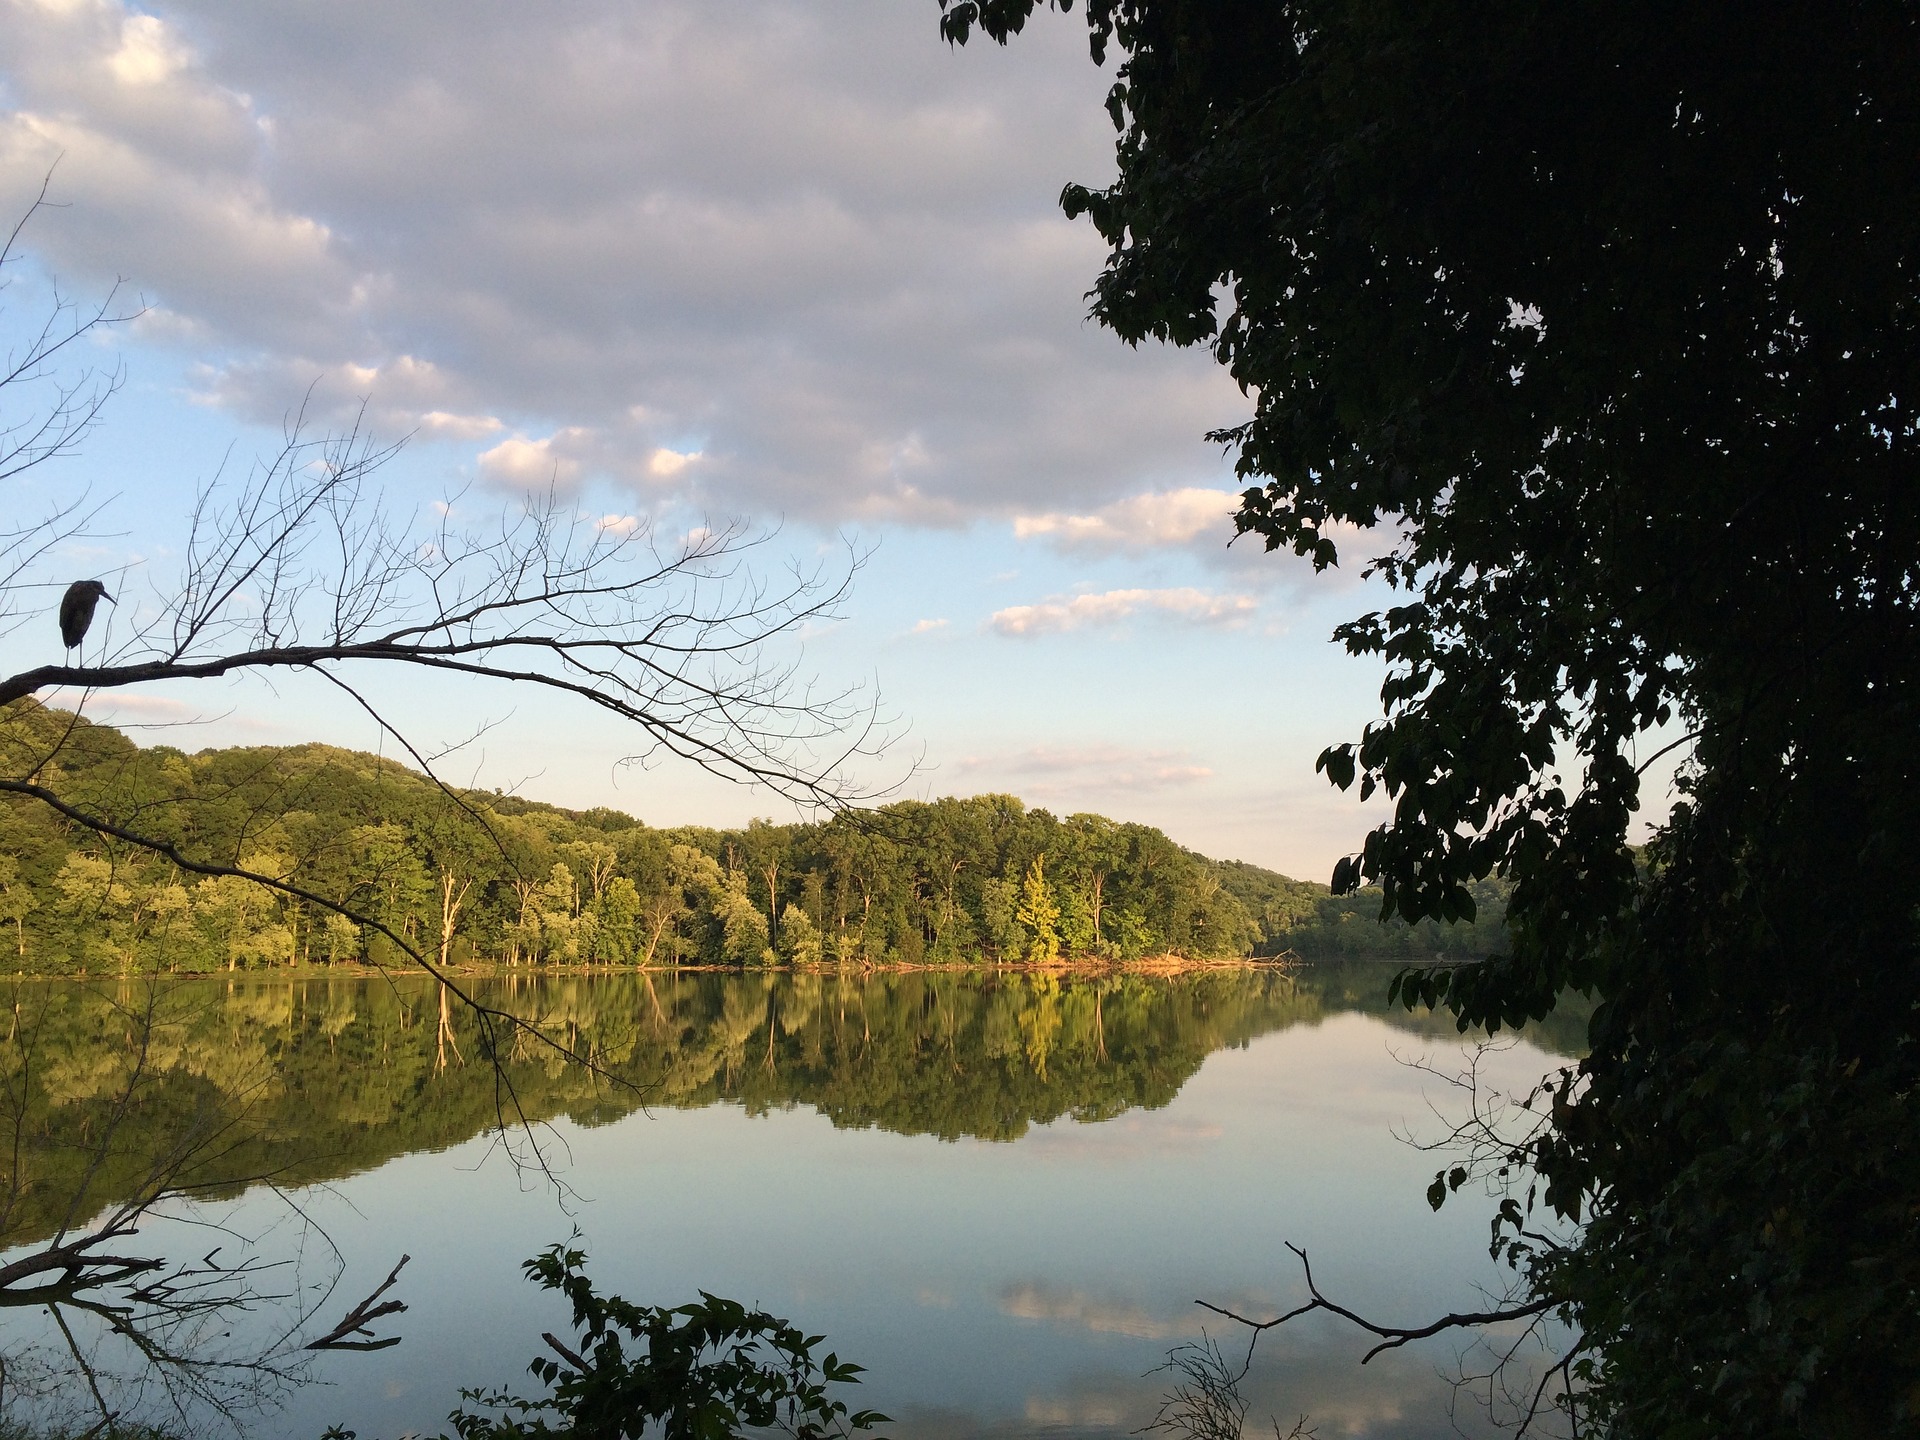 A scenic view of Radnor Lake in Tennessee